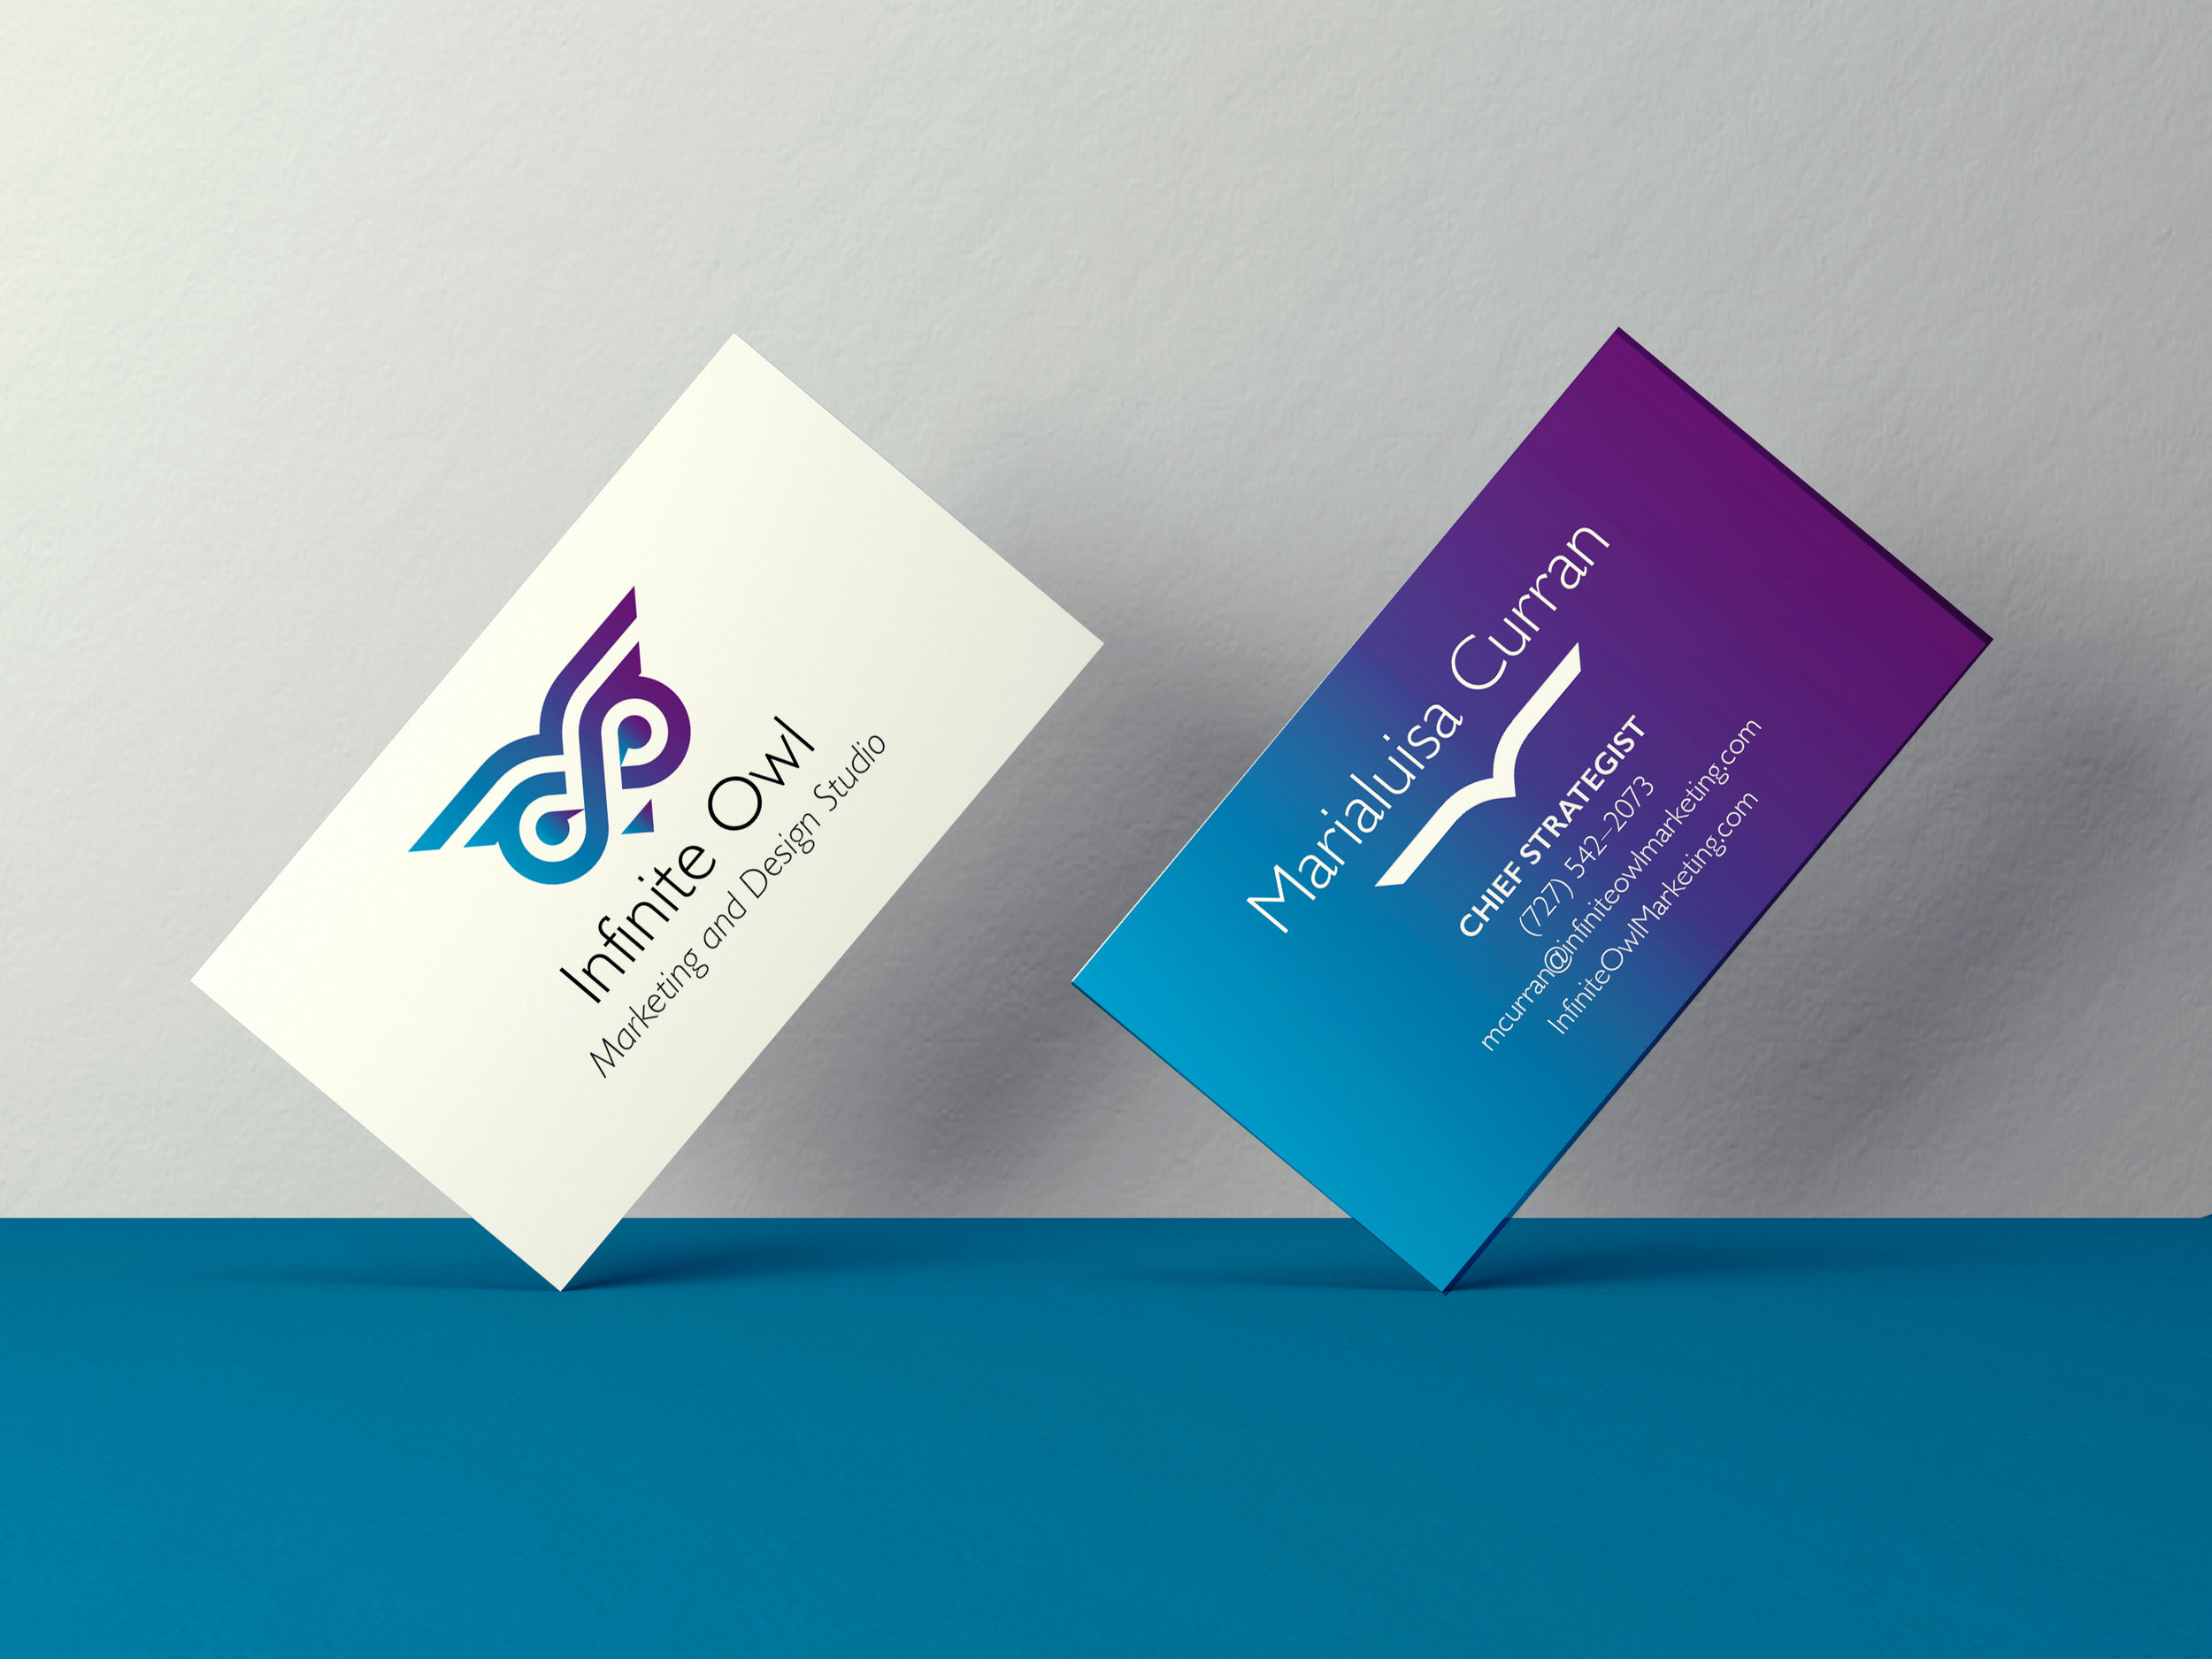 Realistic Business Card Mock-Up #01.jpg